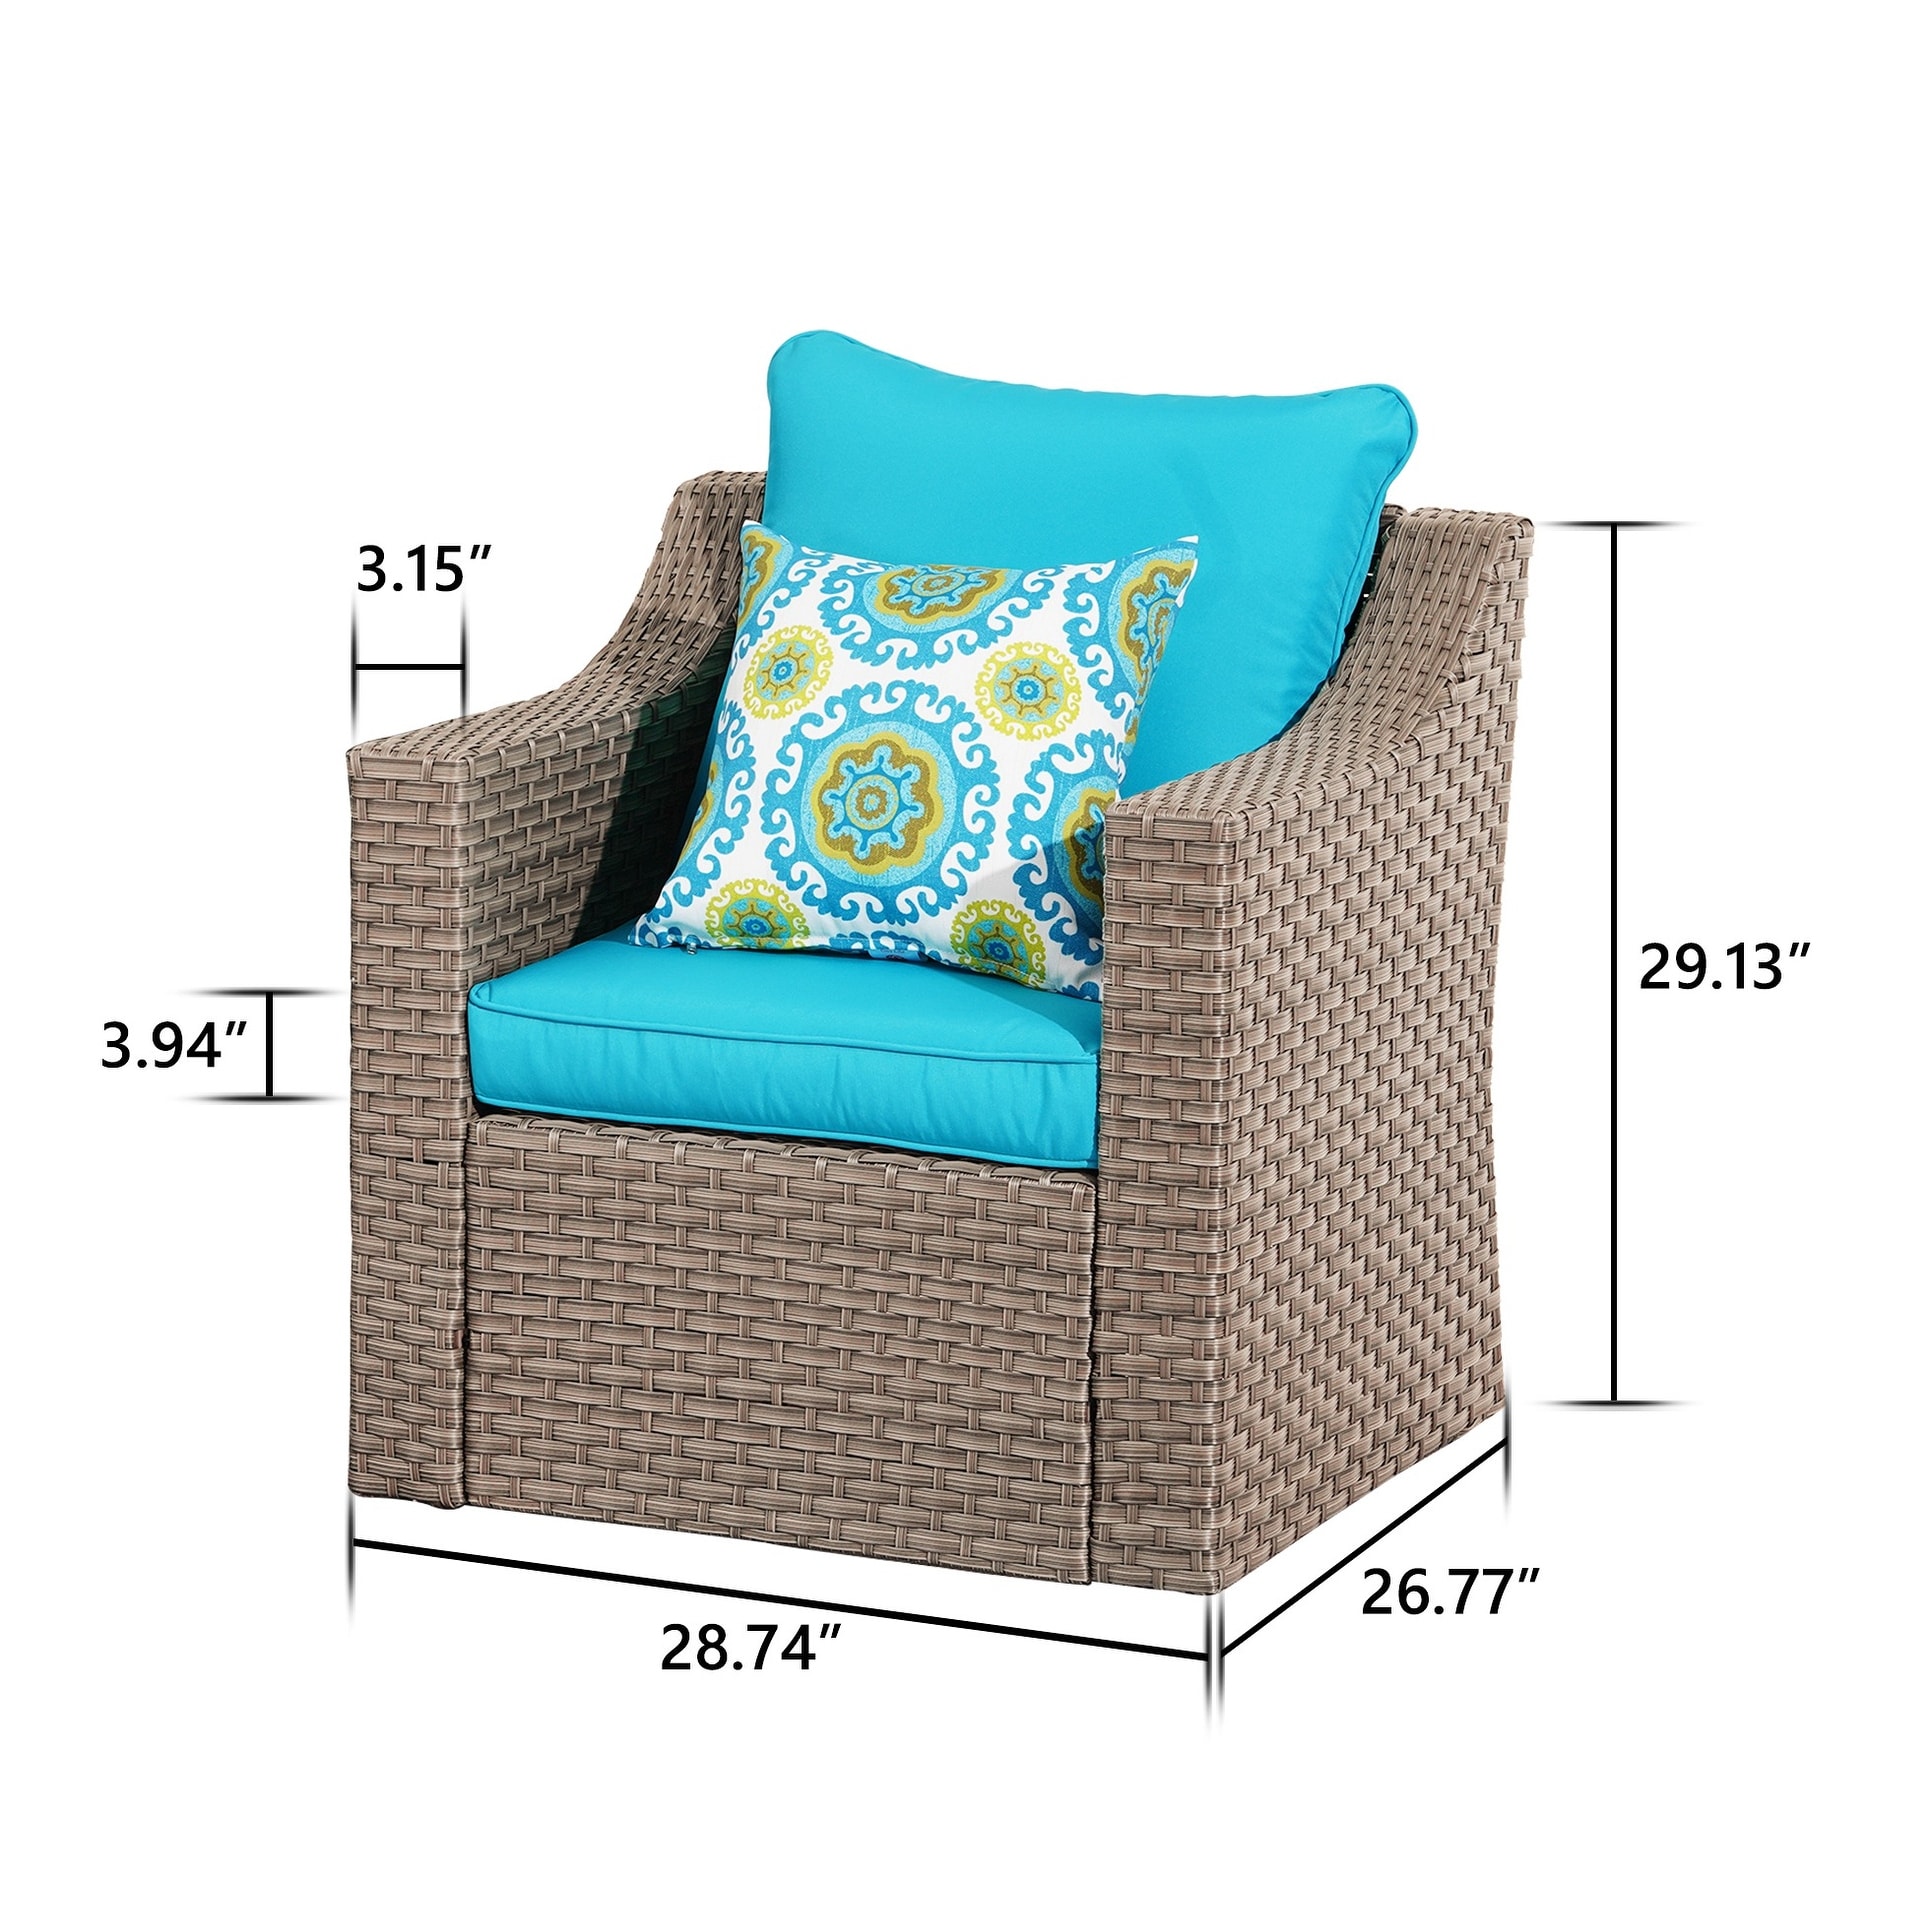 Wicker Outdoor Furniture - Two Single Chair - N/a